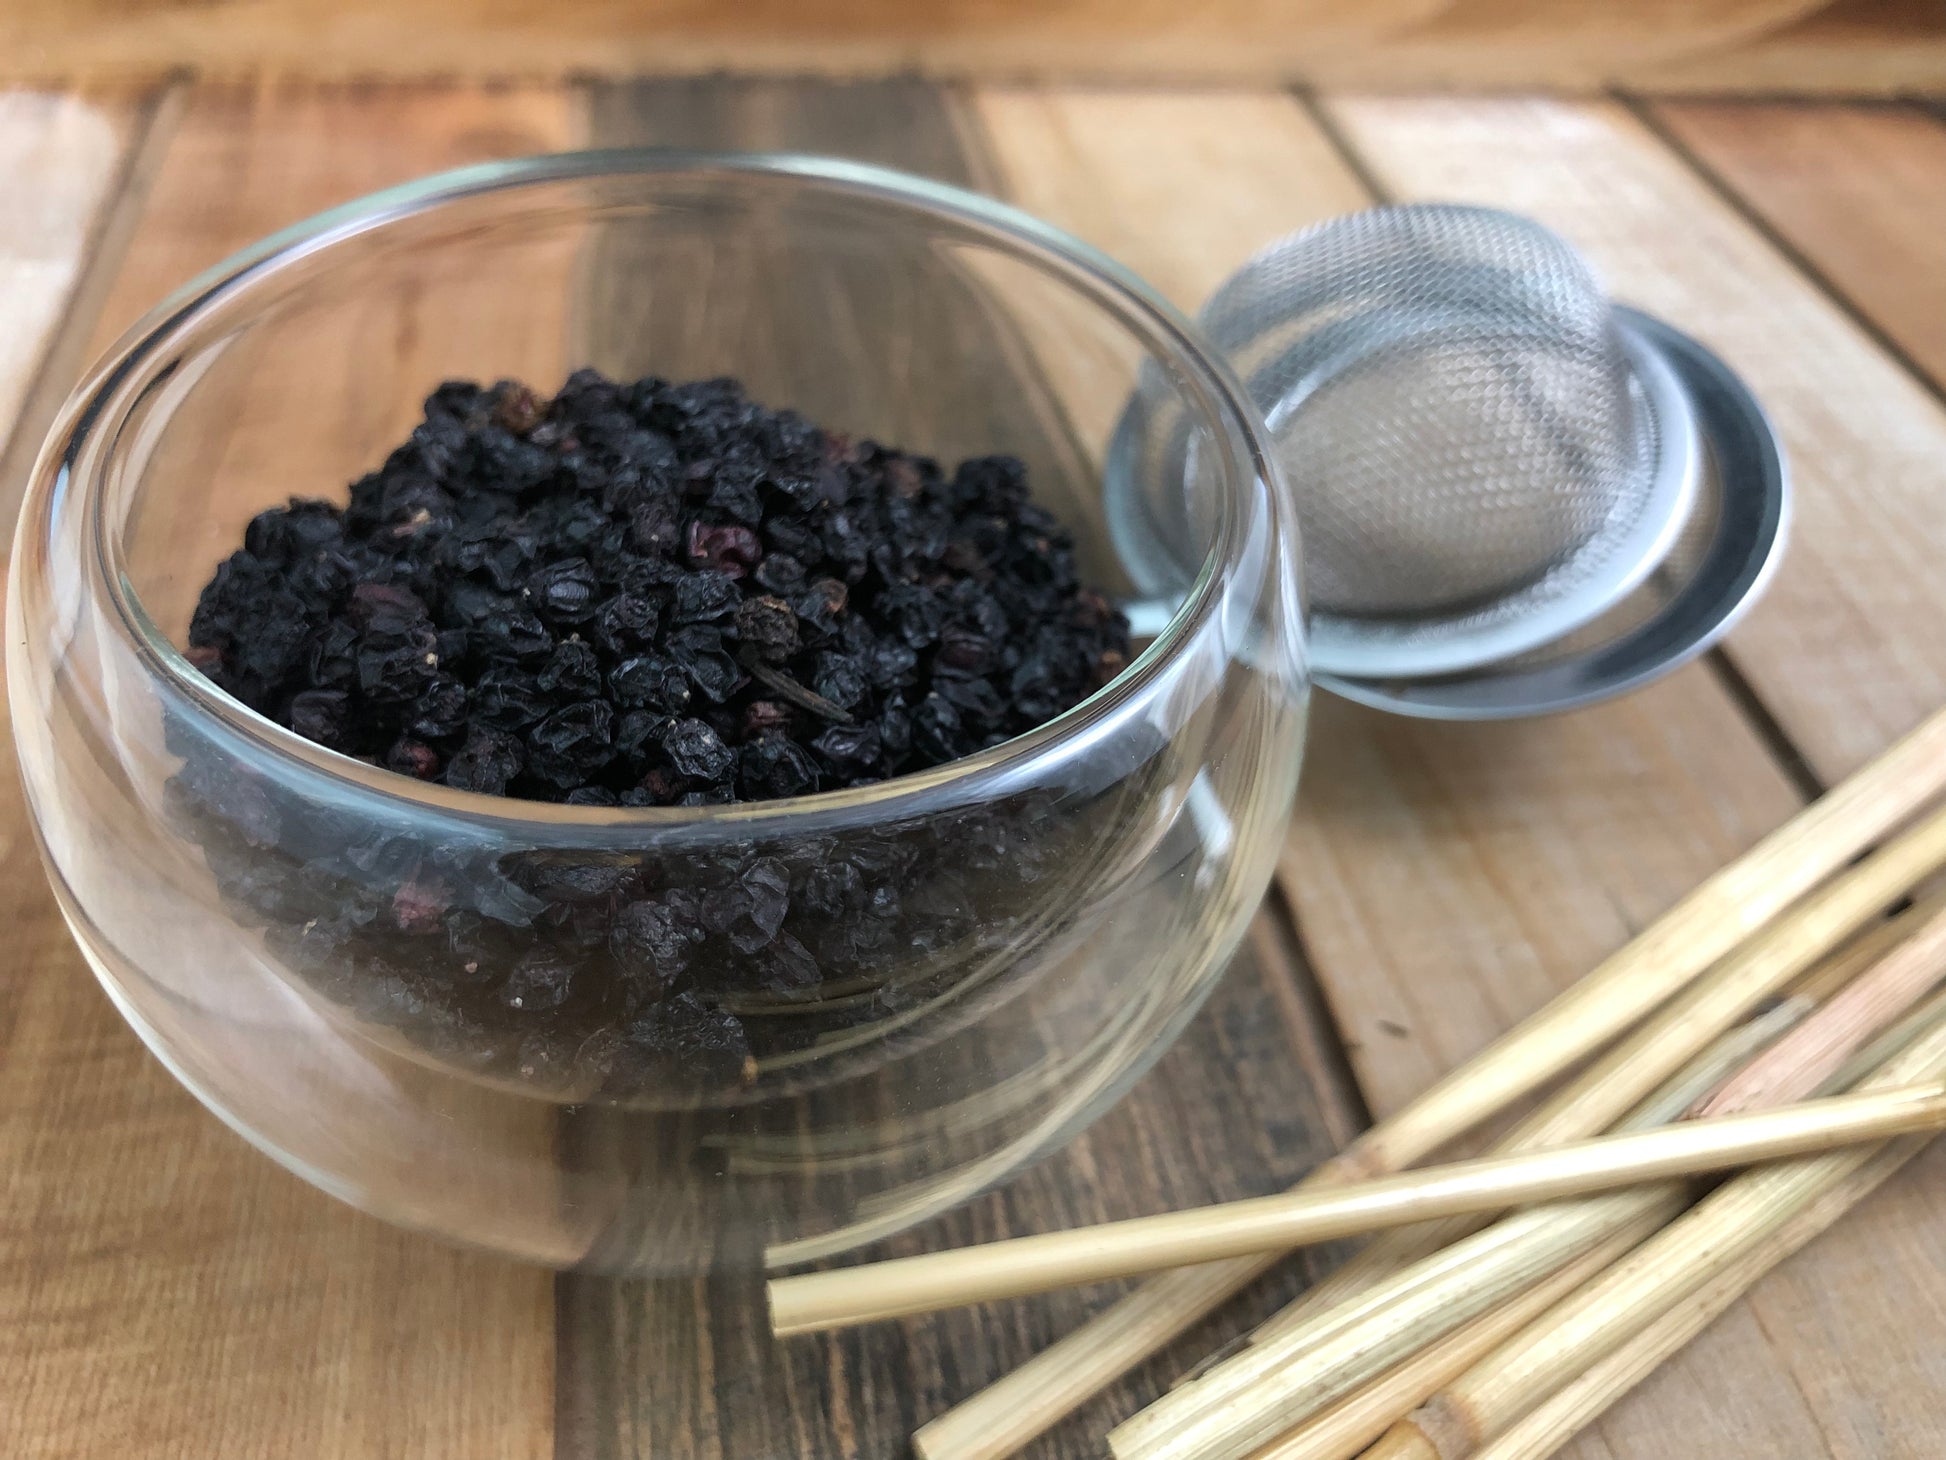 upclose image of dried elderberries in a clear glass cup next to a mesh tea infuser and wooden sticks on a wooden tray table